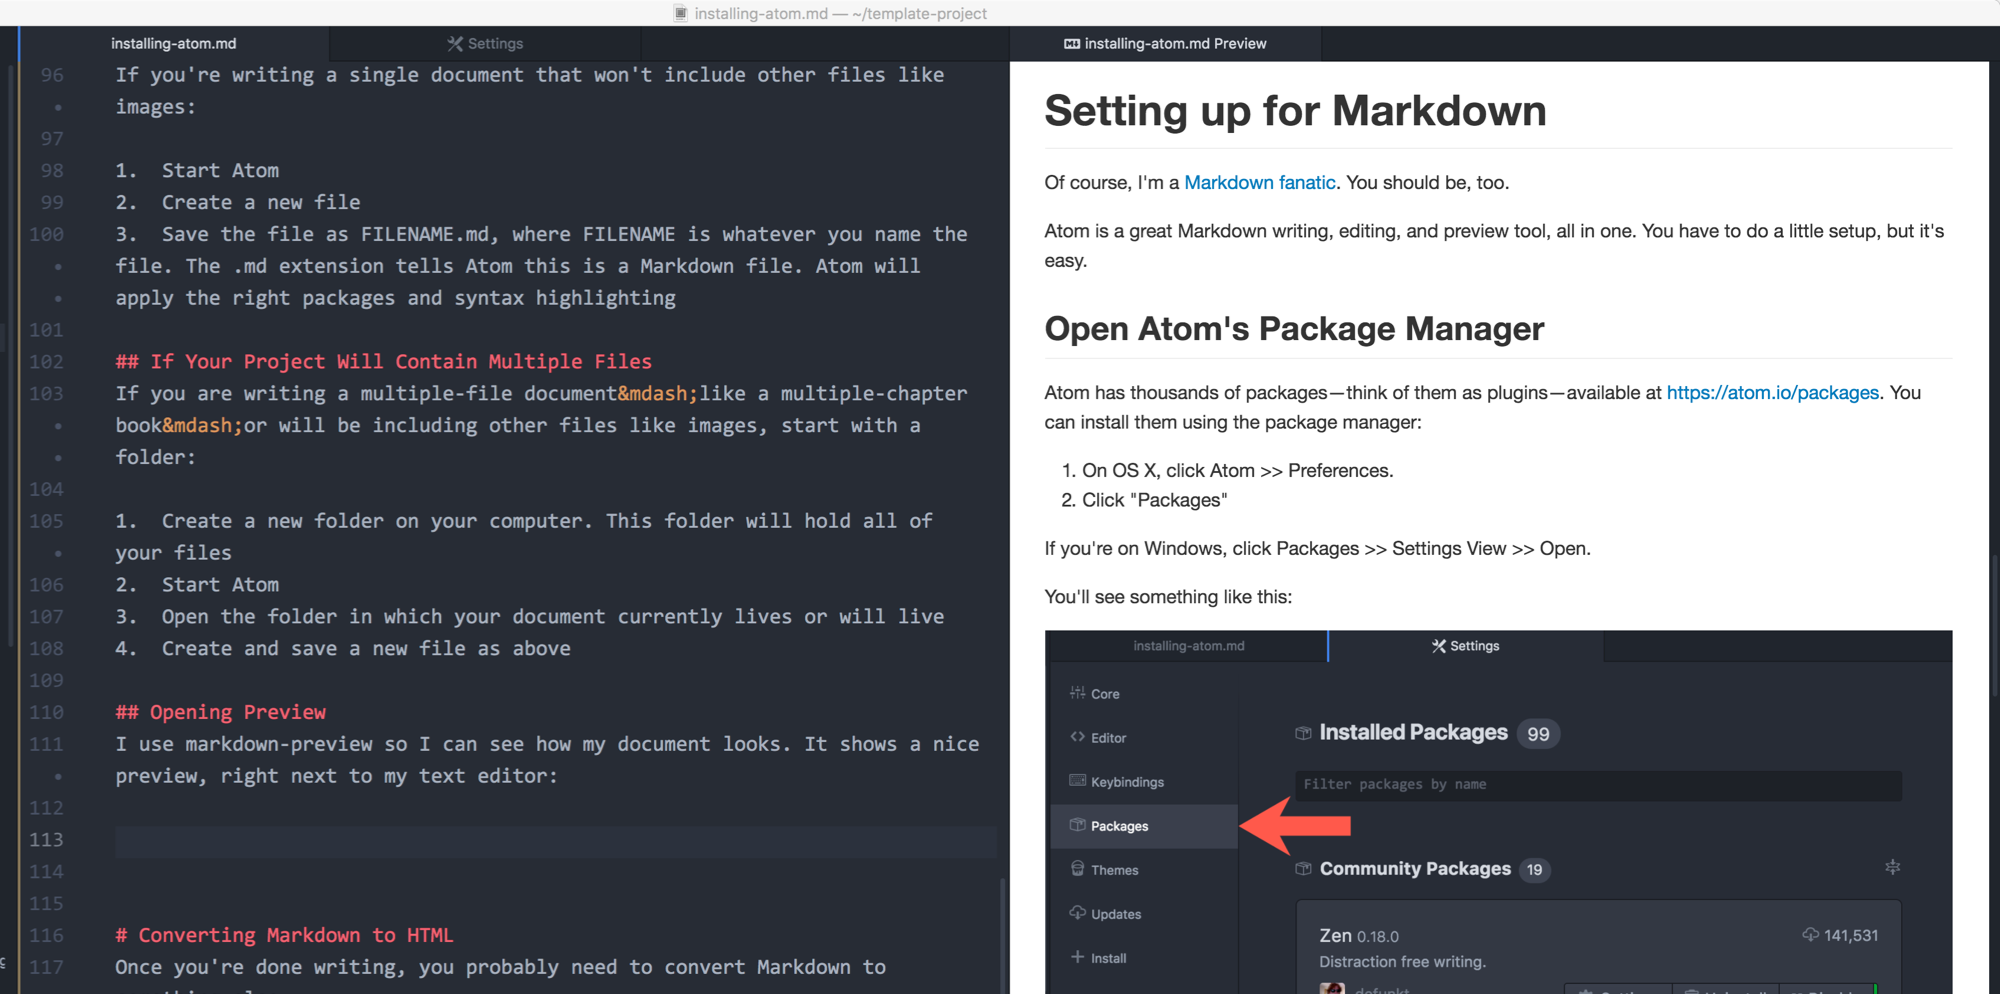 How to Set Up & Use as a Markdown Editor - Portent